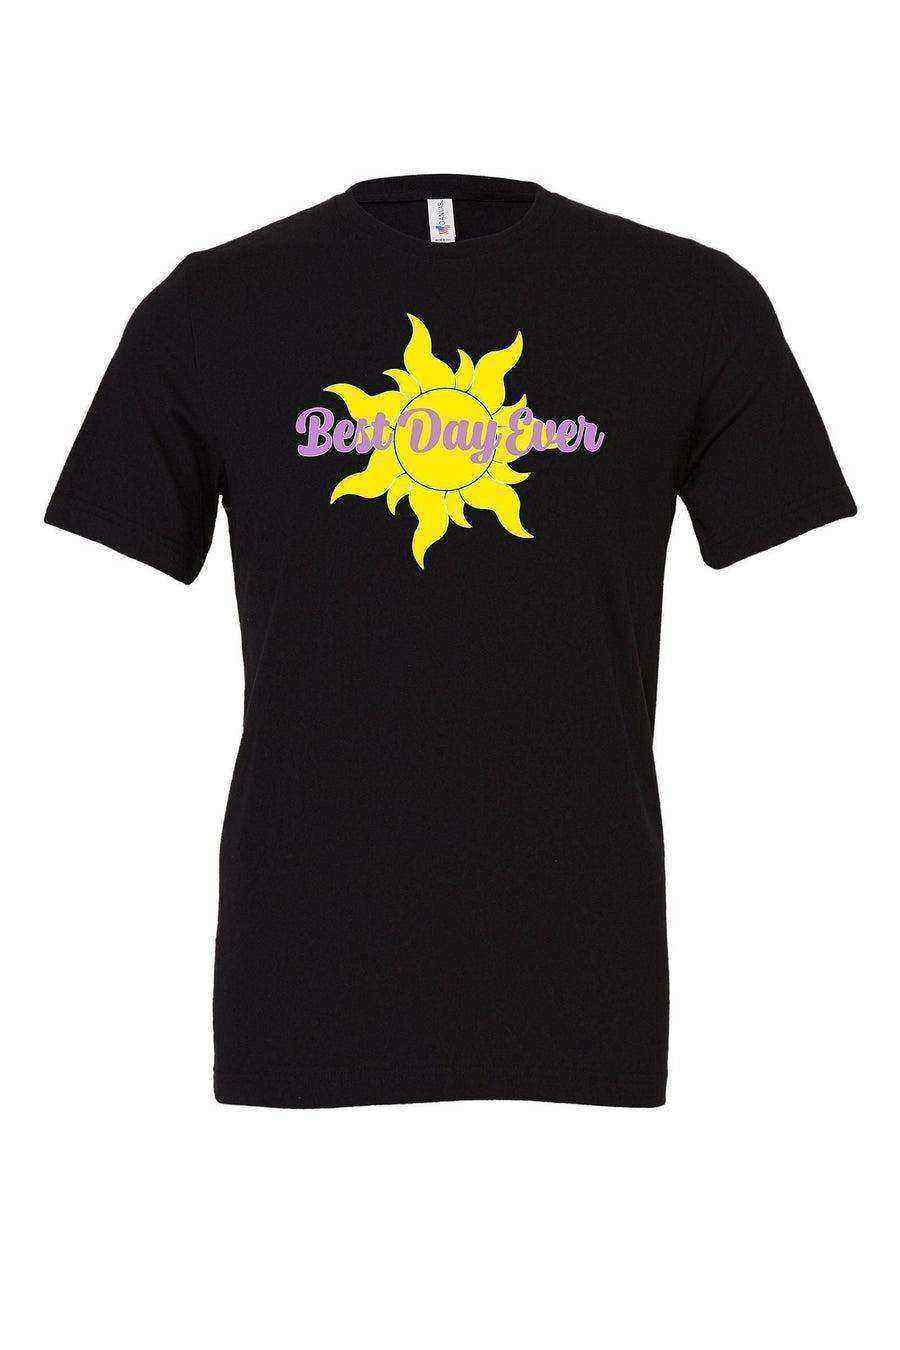 Tangled Tee | Rapunzel Best Day Ever - Dylan's Tees